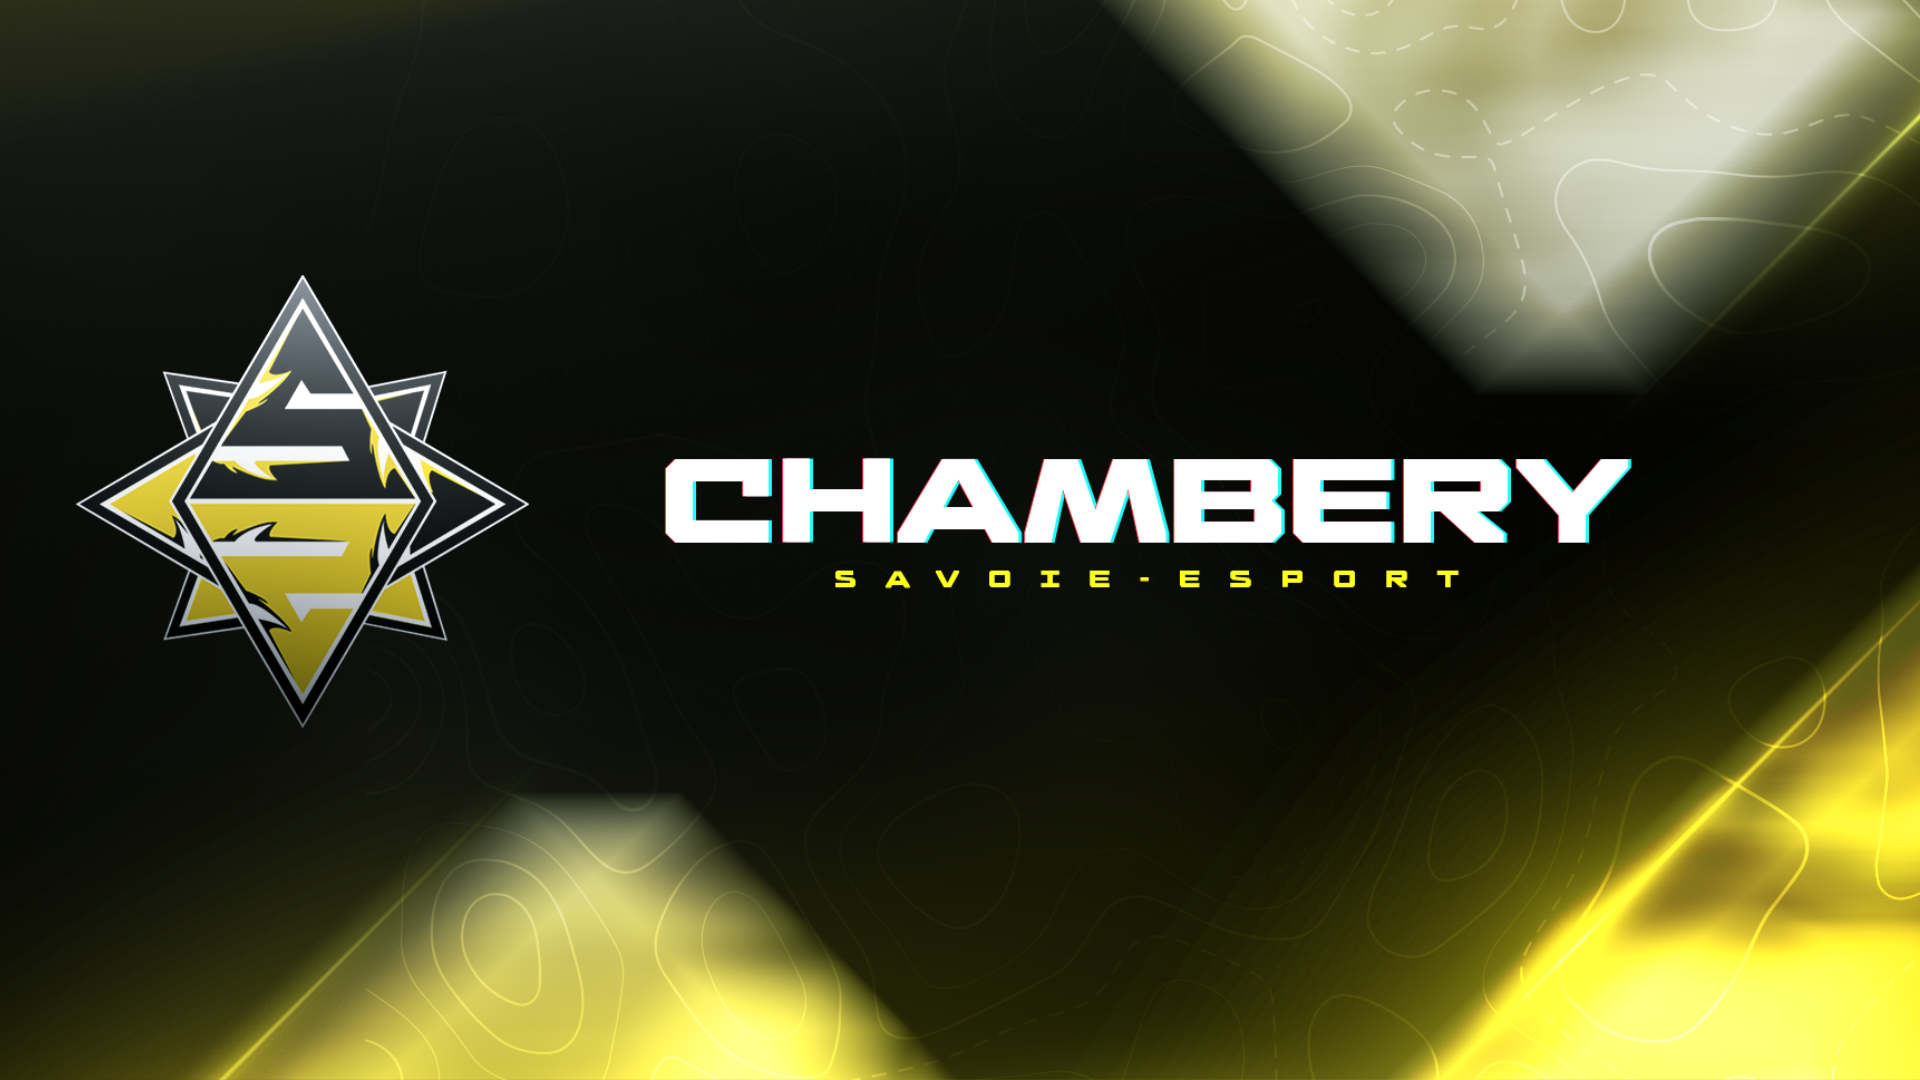 You are currently viewing Chambery Savoie Esports